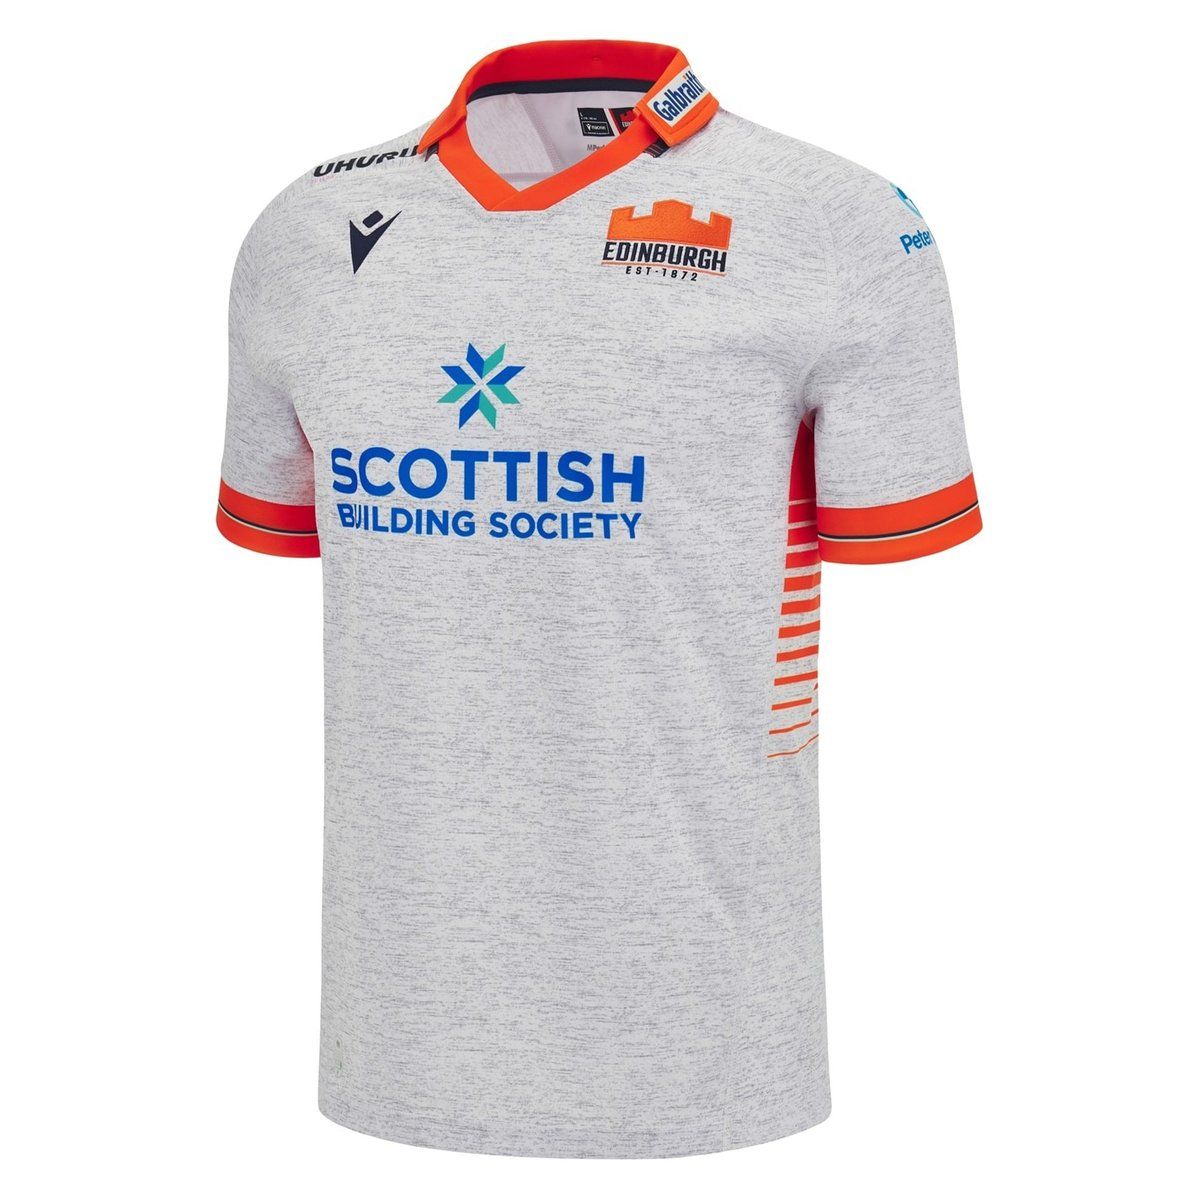 Official Edinburgh Rugby Shirts and Clothing